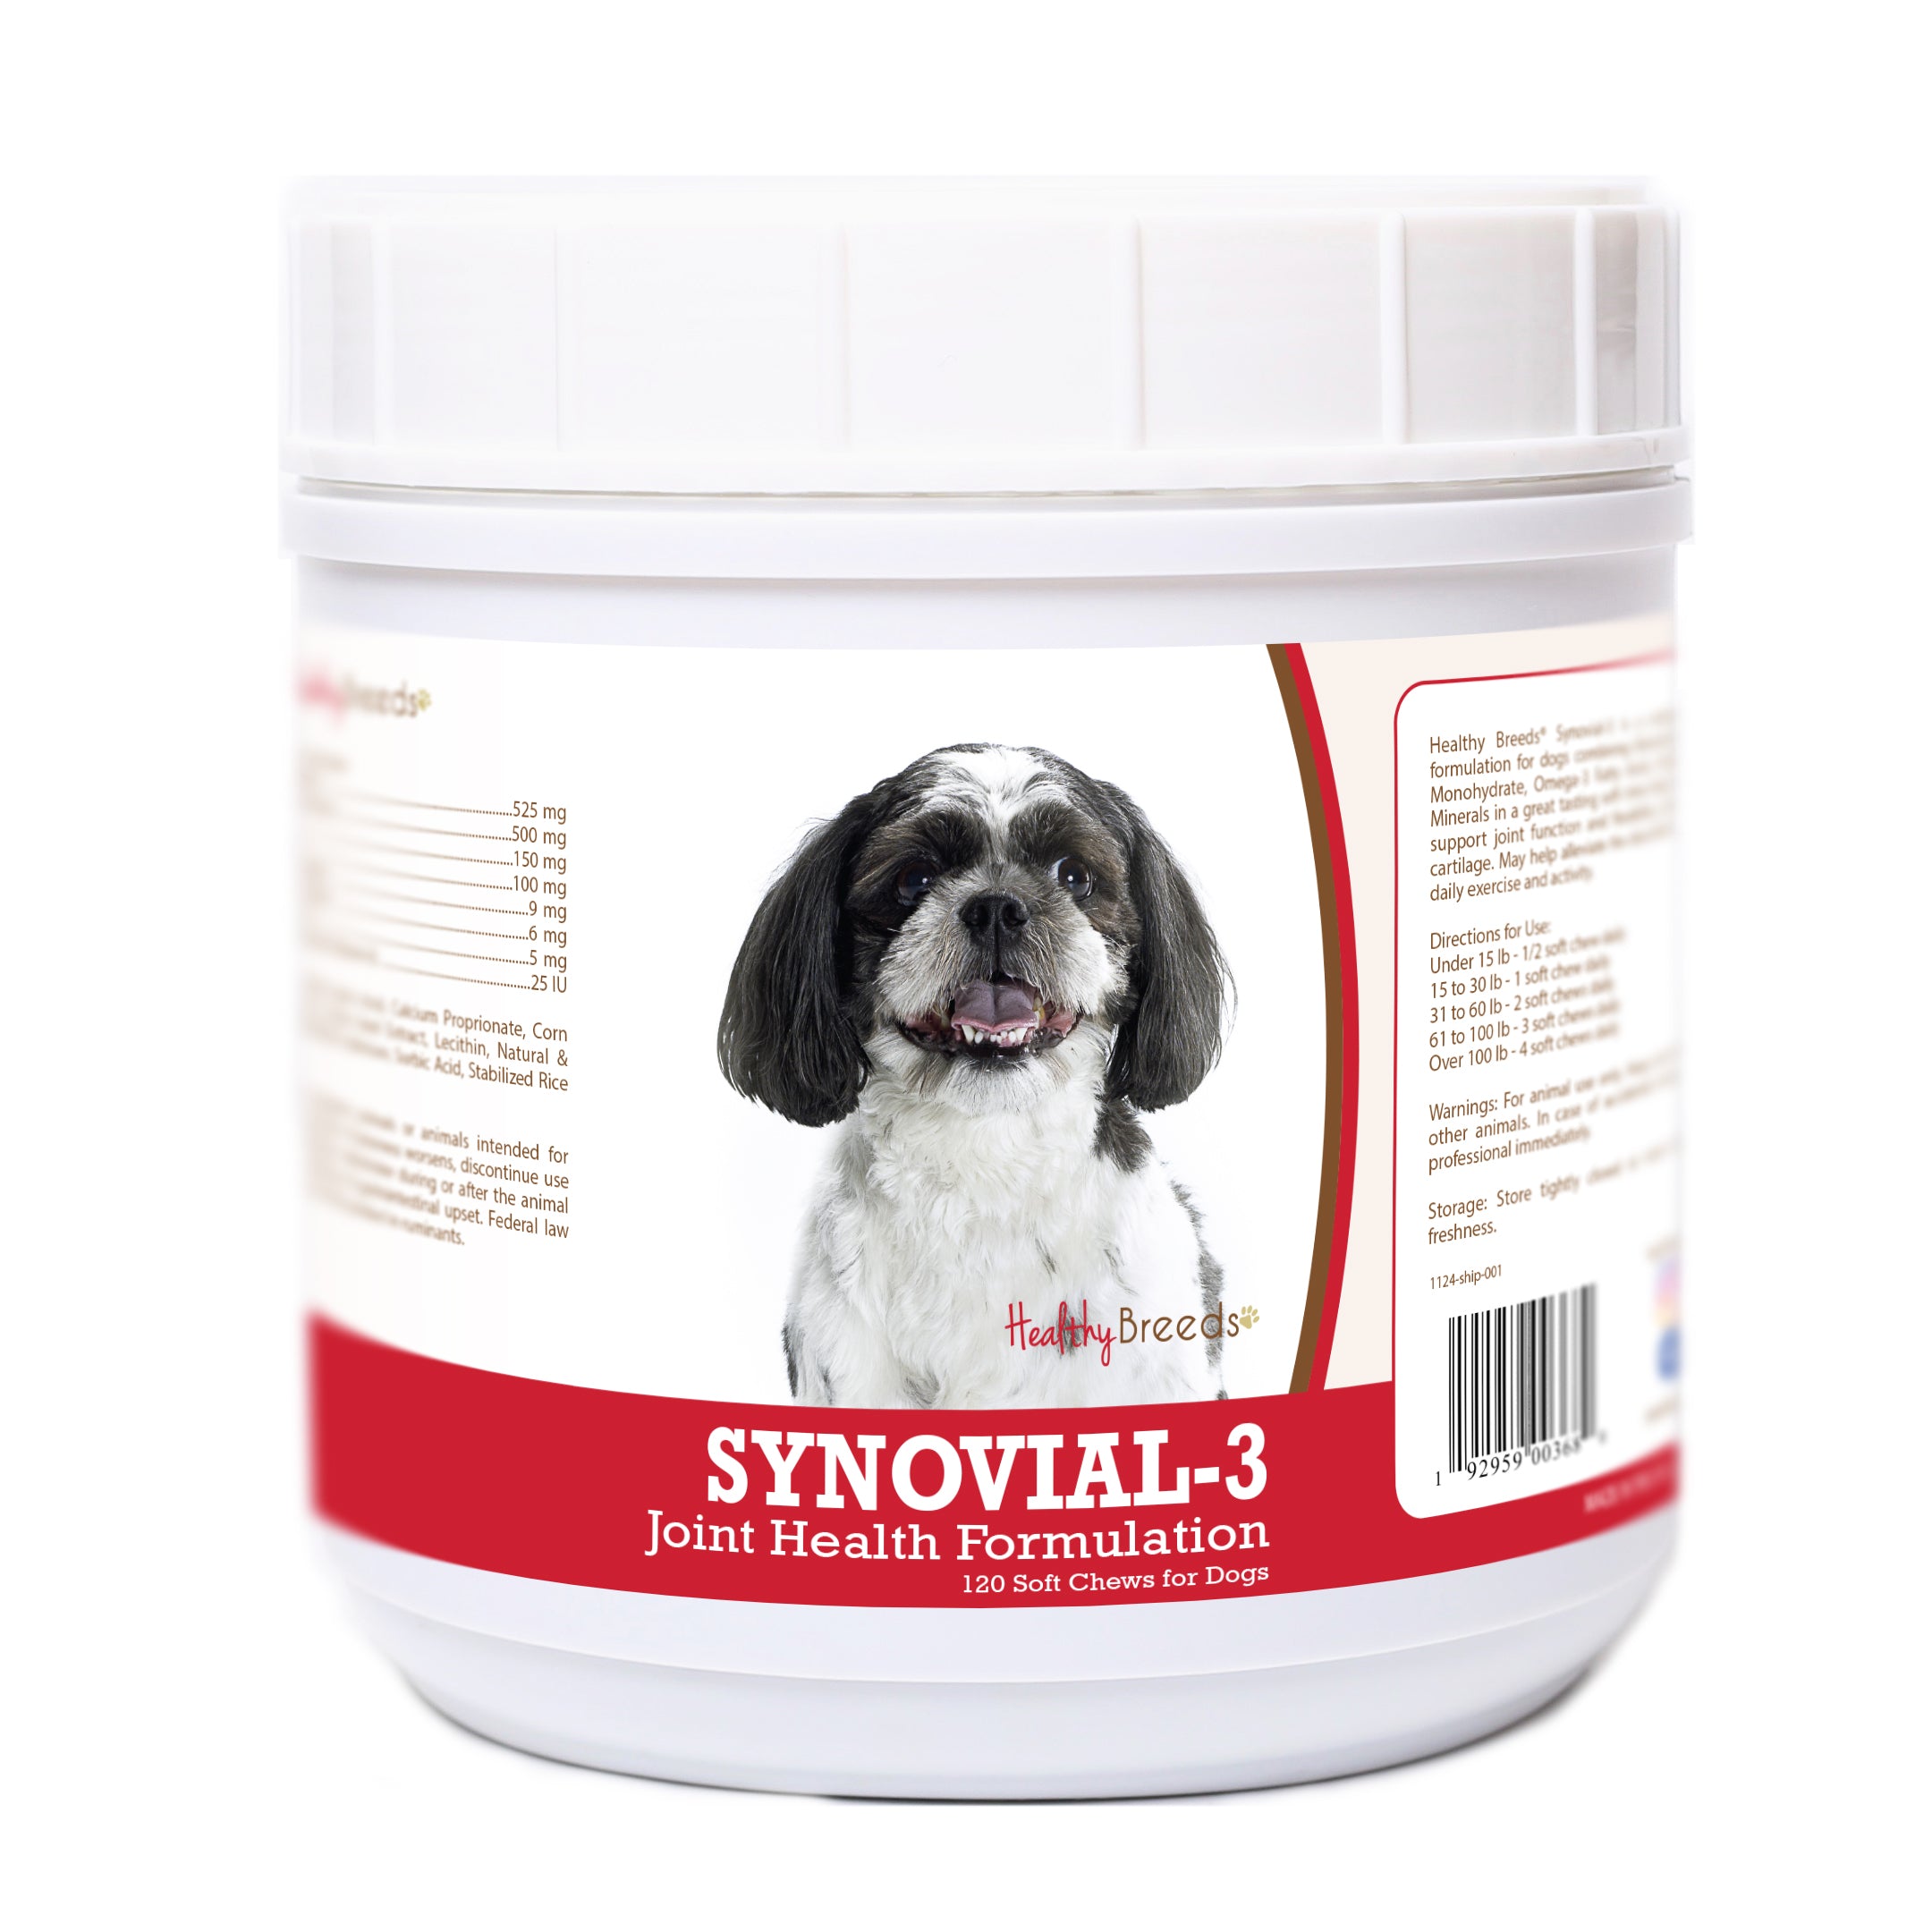 Shih-Poo Synovial-3 Joint Health Formulation Soft Chews 120 Count